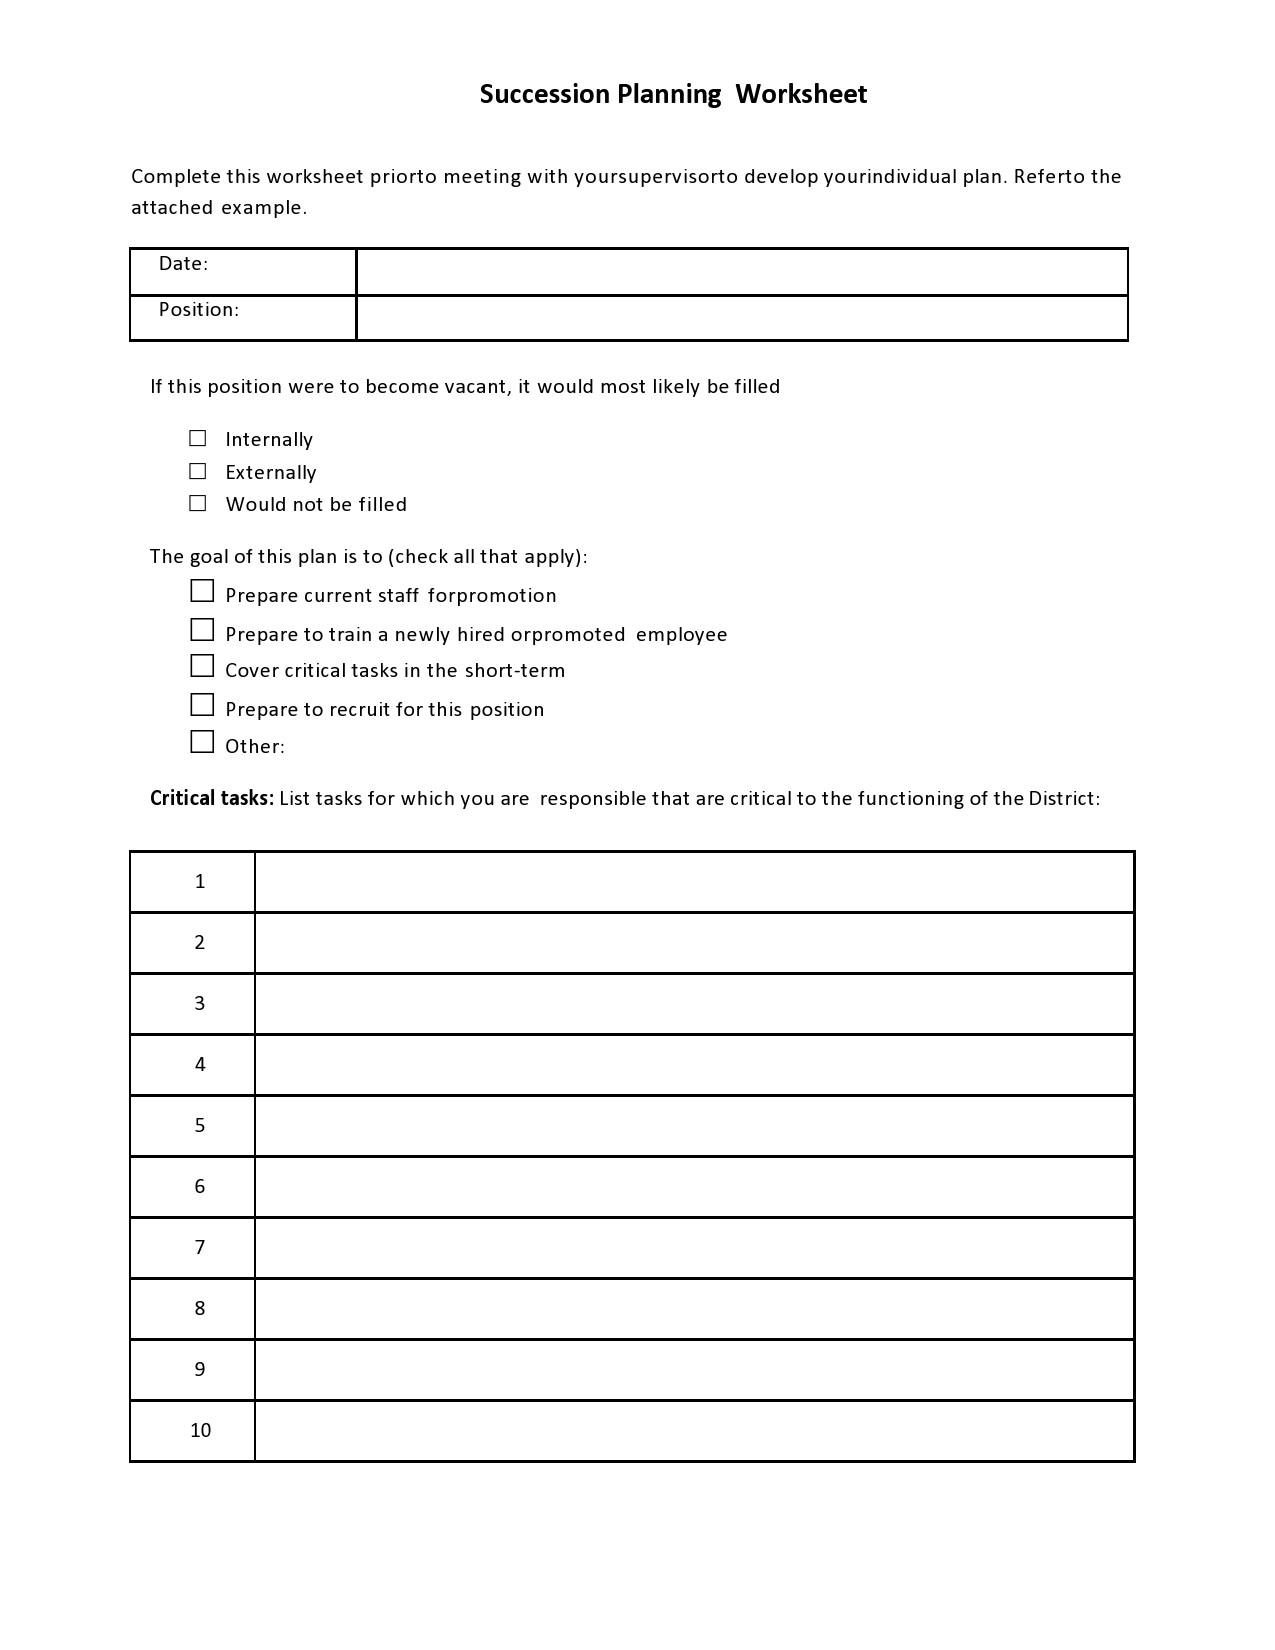 Free succession planning template 21